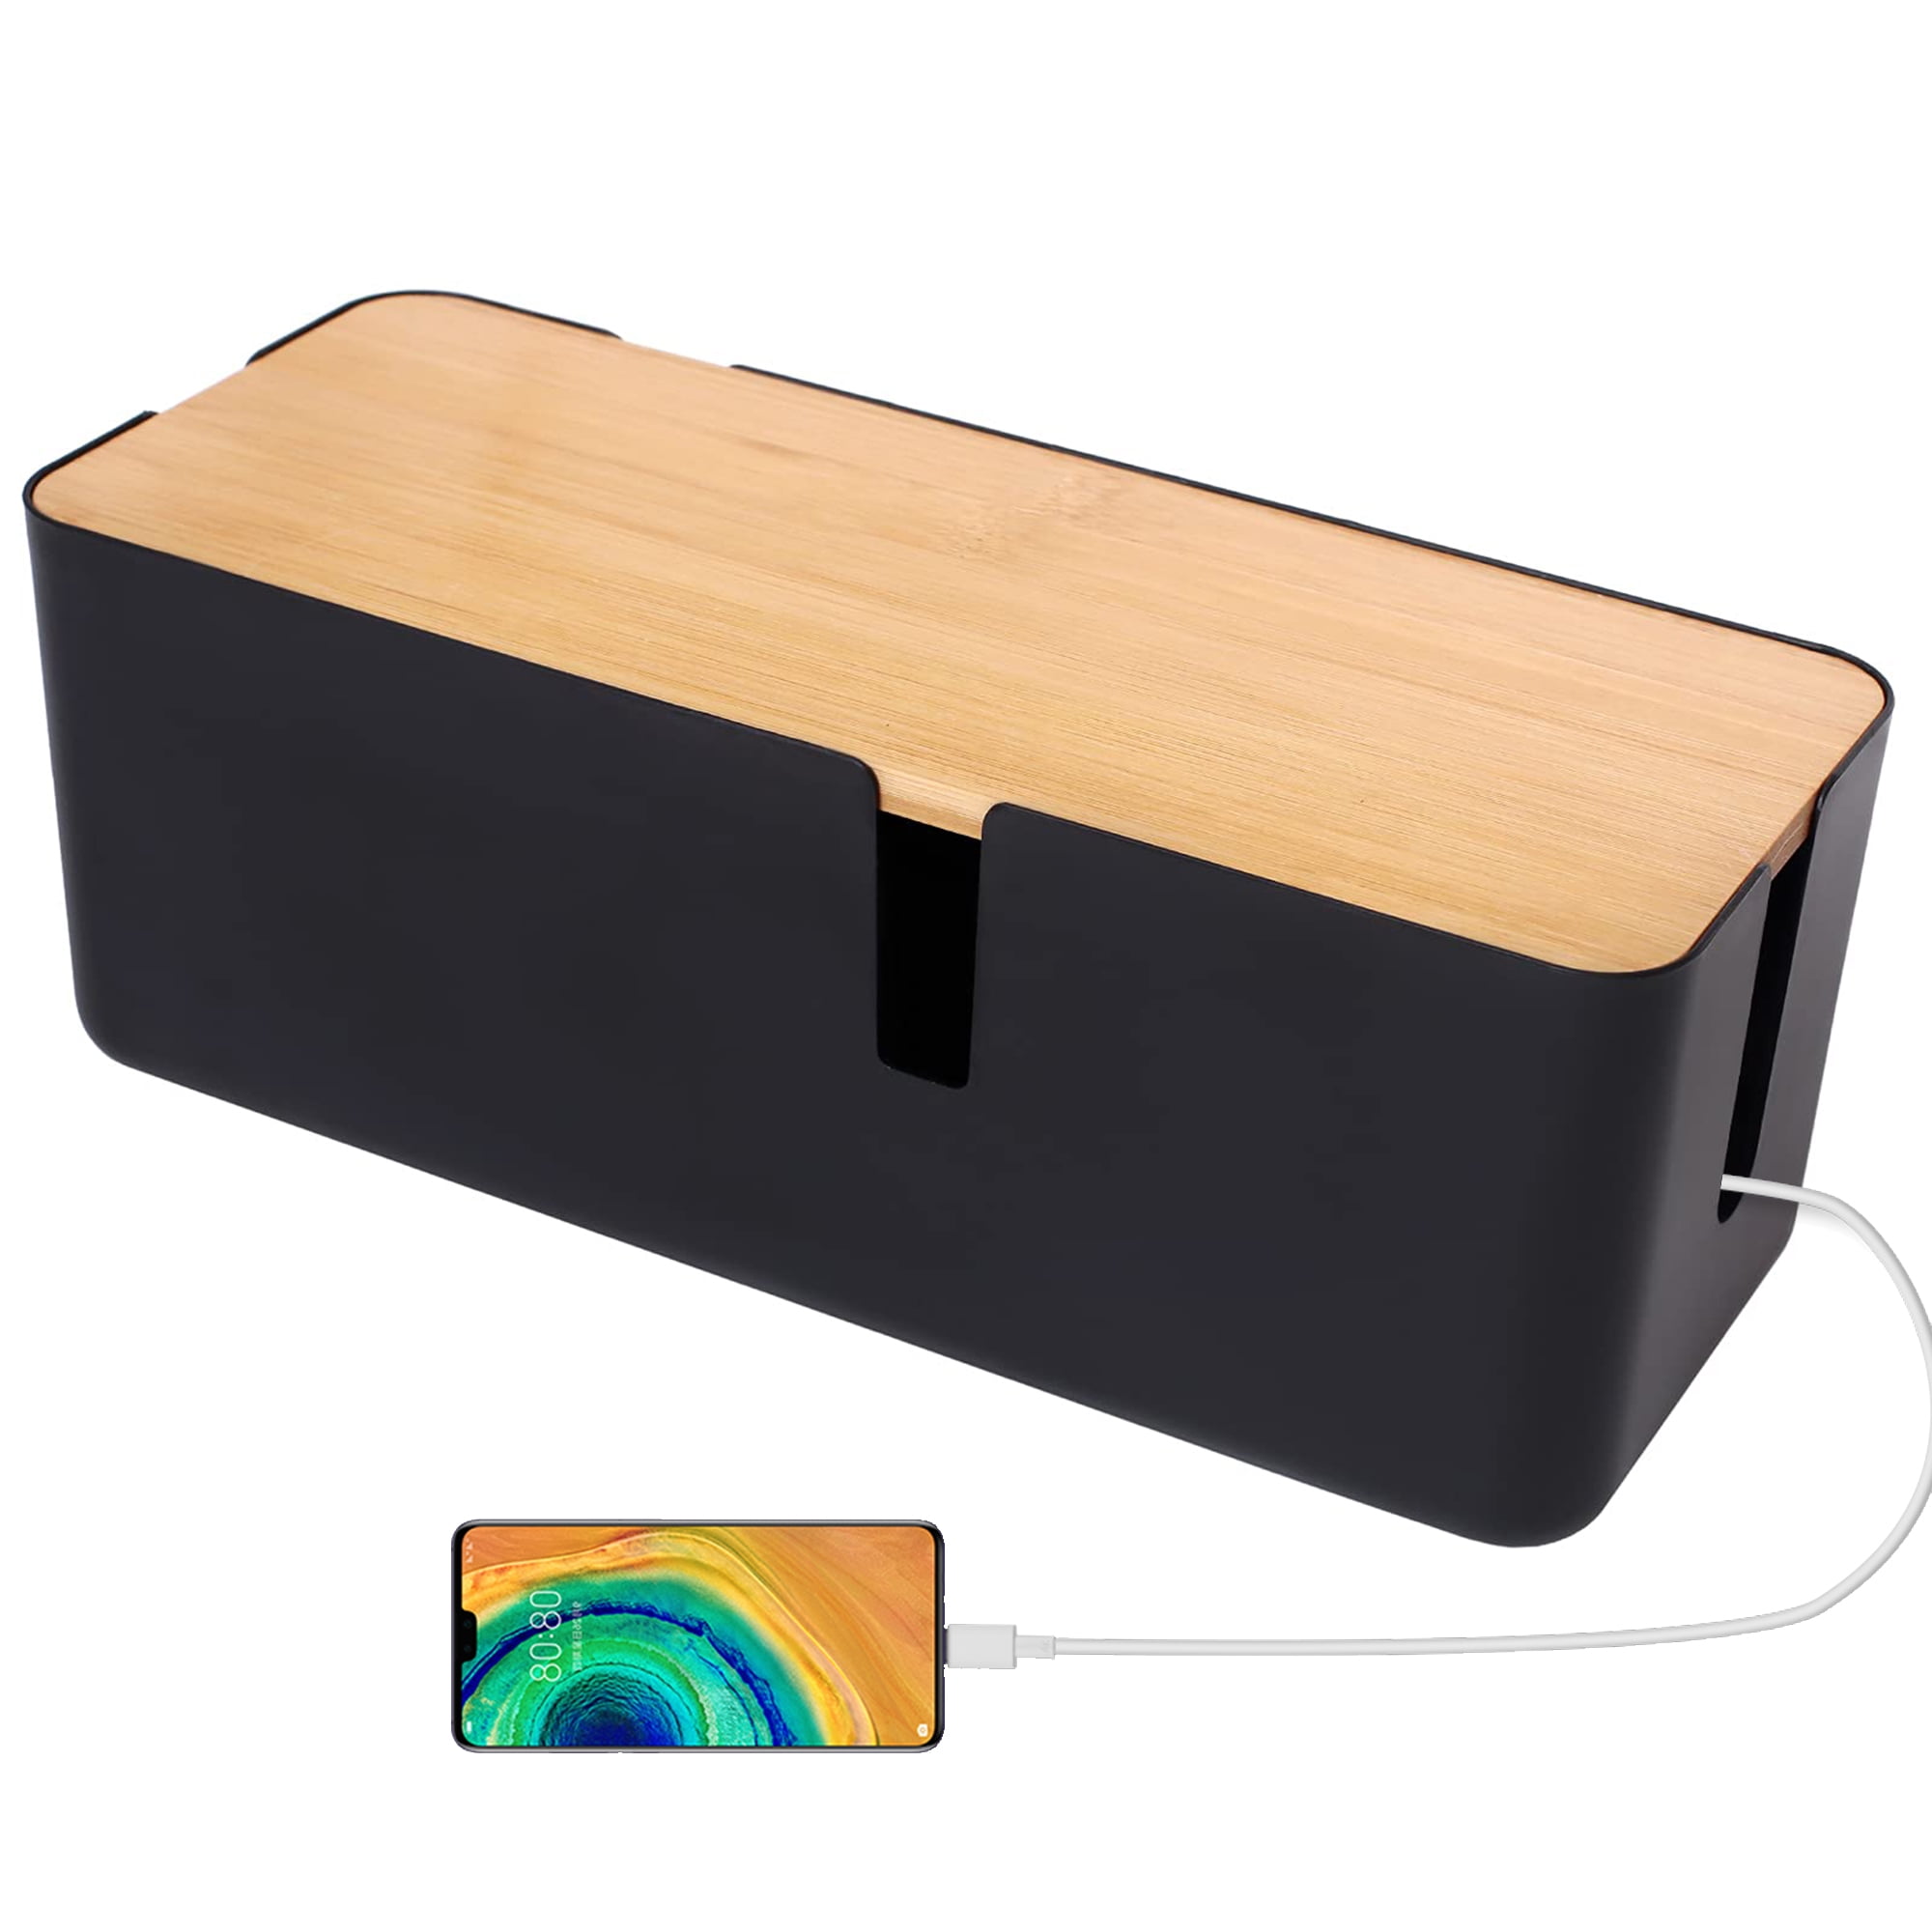 Cable Management Box - 12x 5x 4.5 inches, Cable Cover & Wood Lid